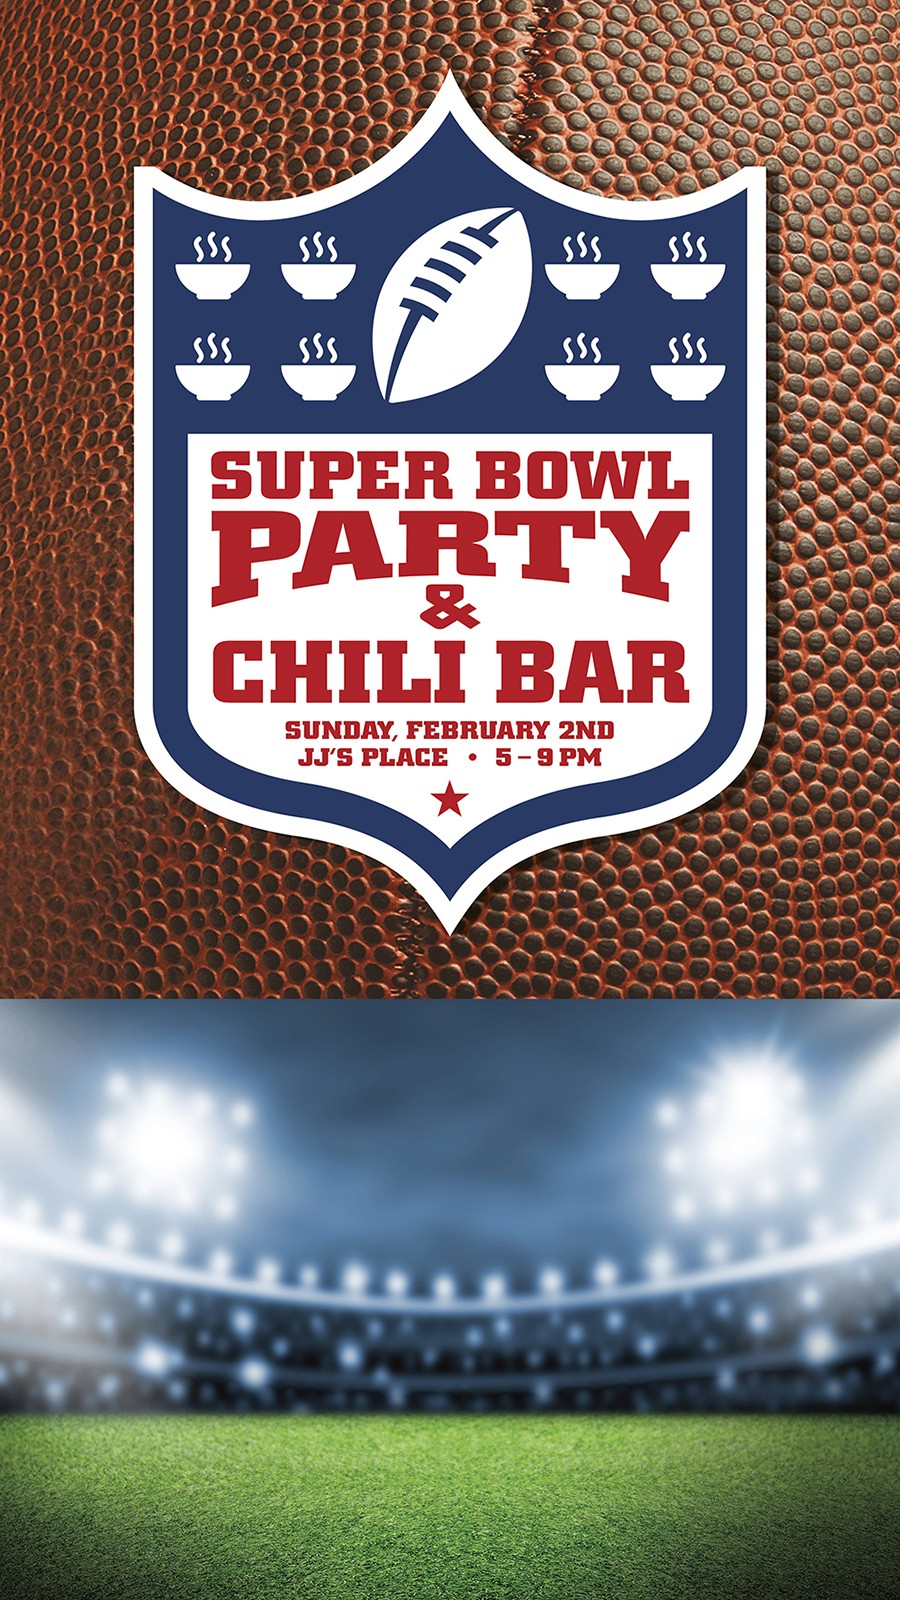 Superbowl Party with Chili Bar!